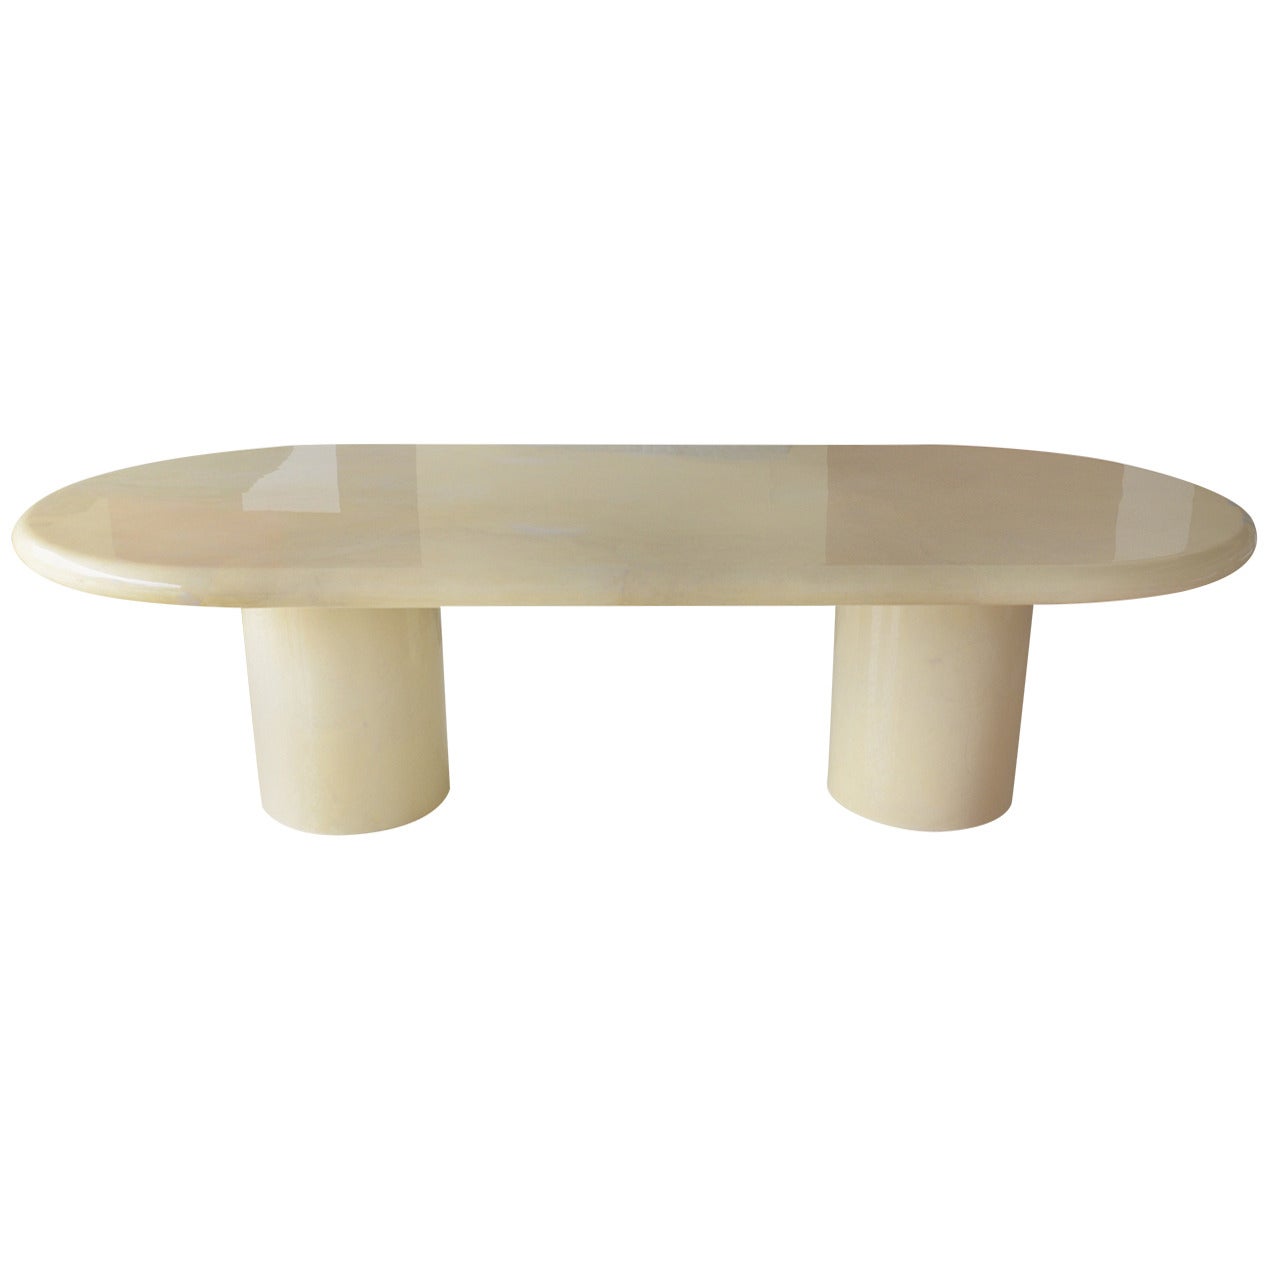 Lacquered Karl Springer Style Goatskin Oval Dining Table